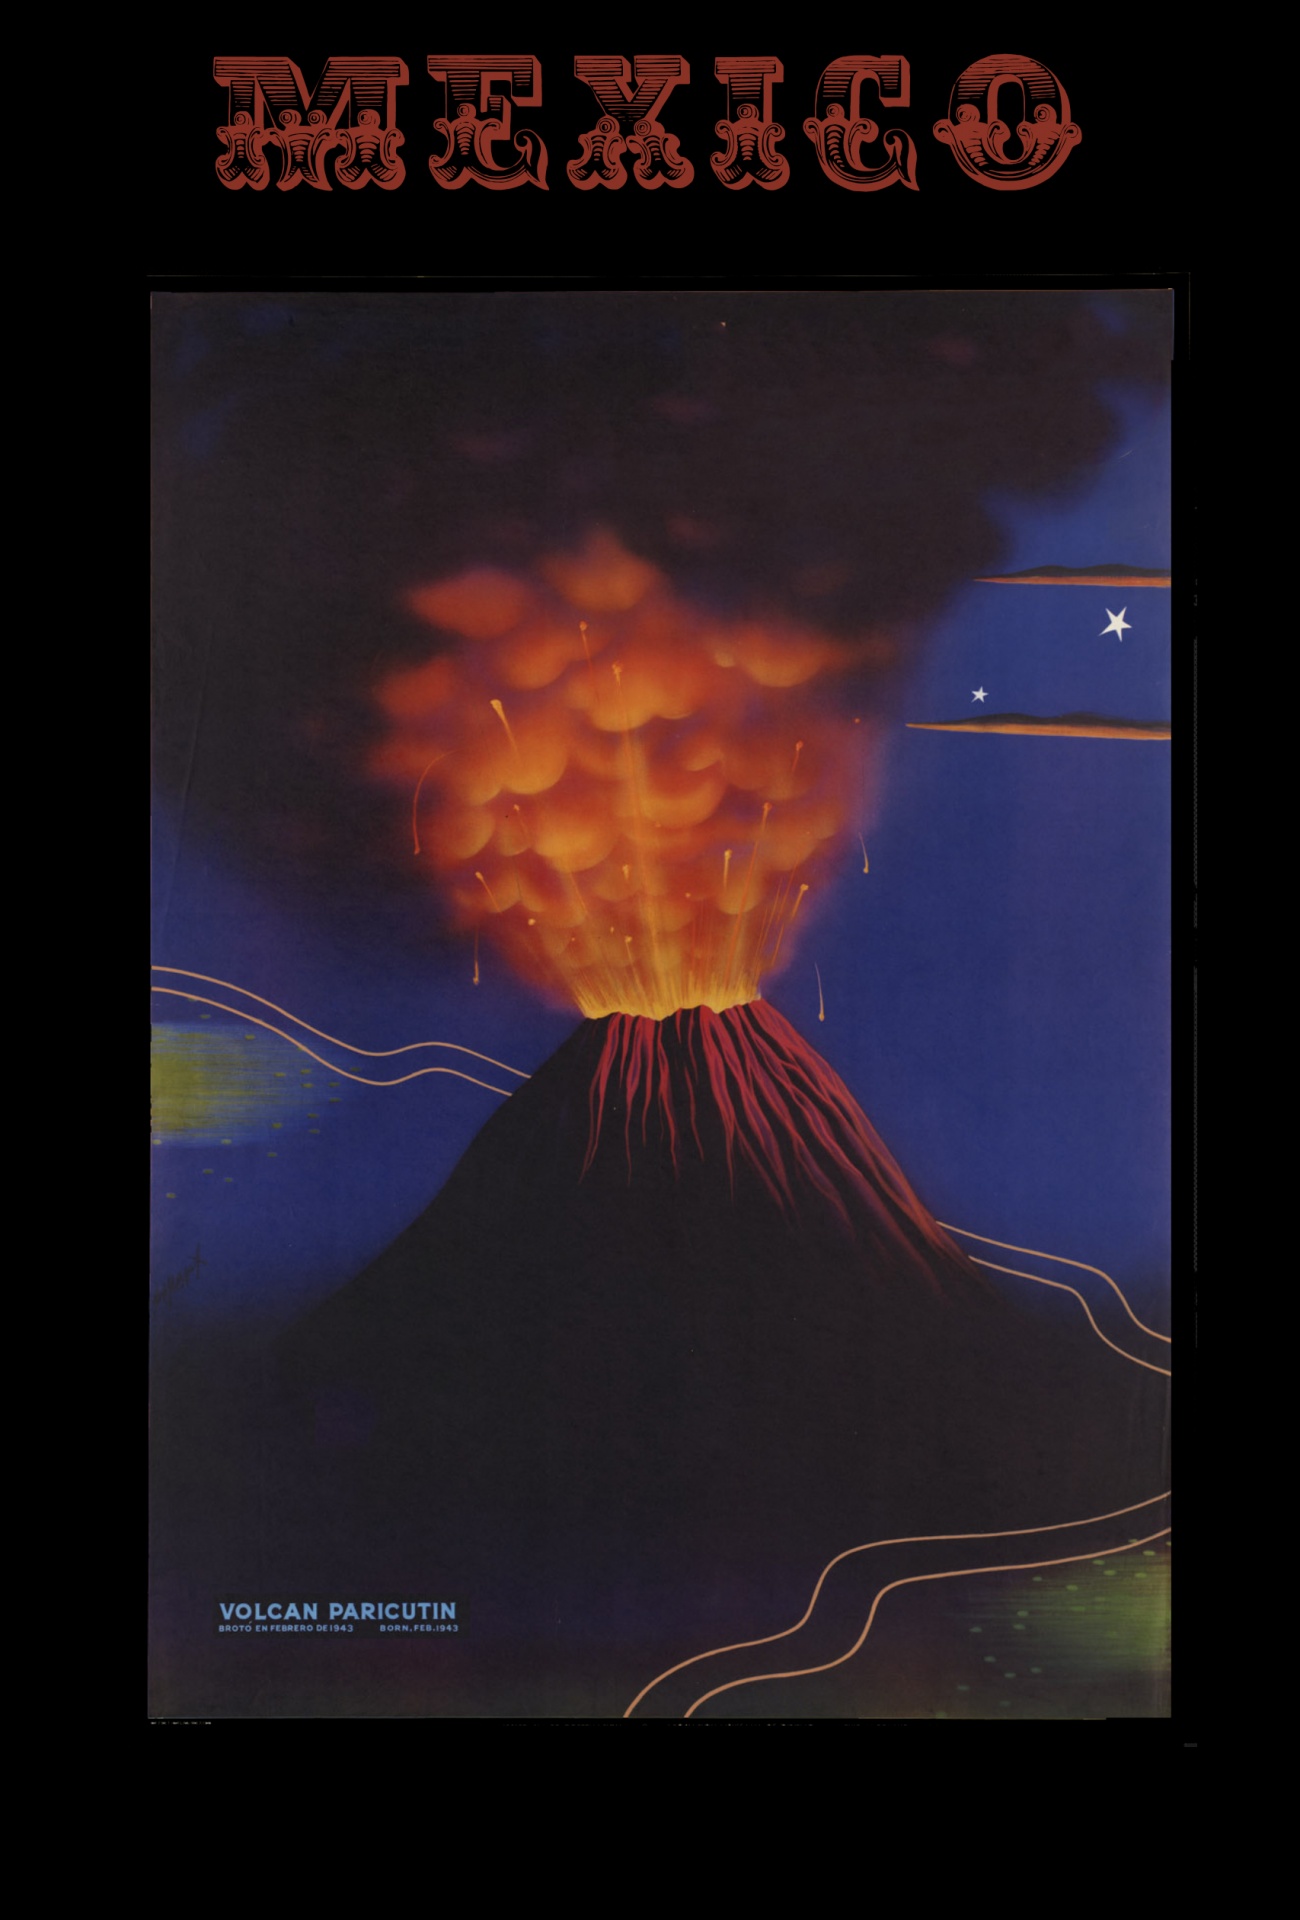 Travel Poster for Mexico showing a volcano erupting